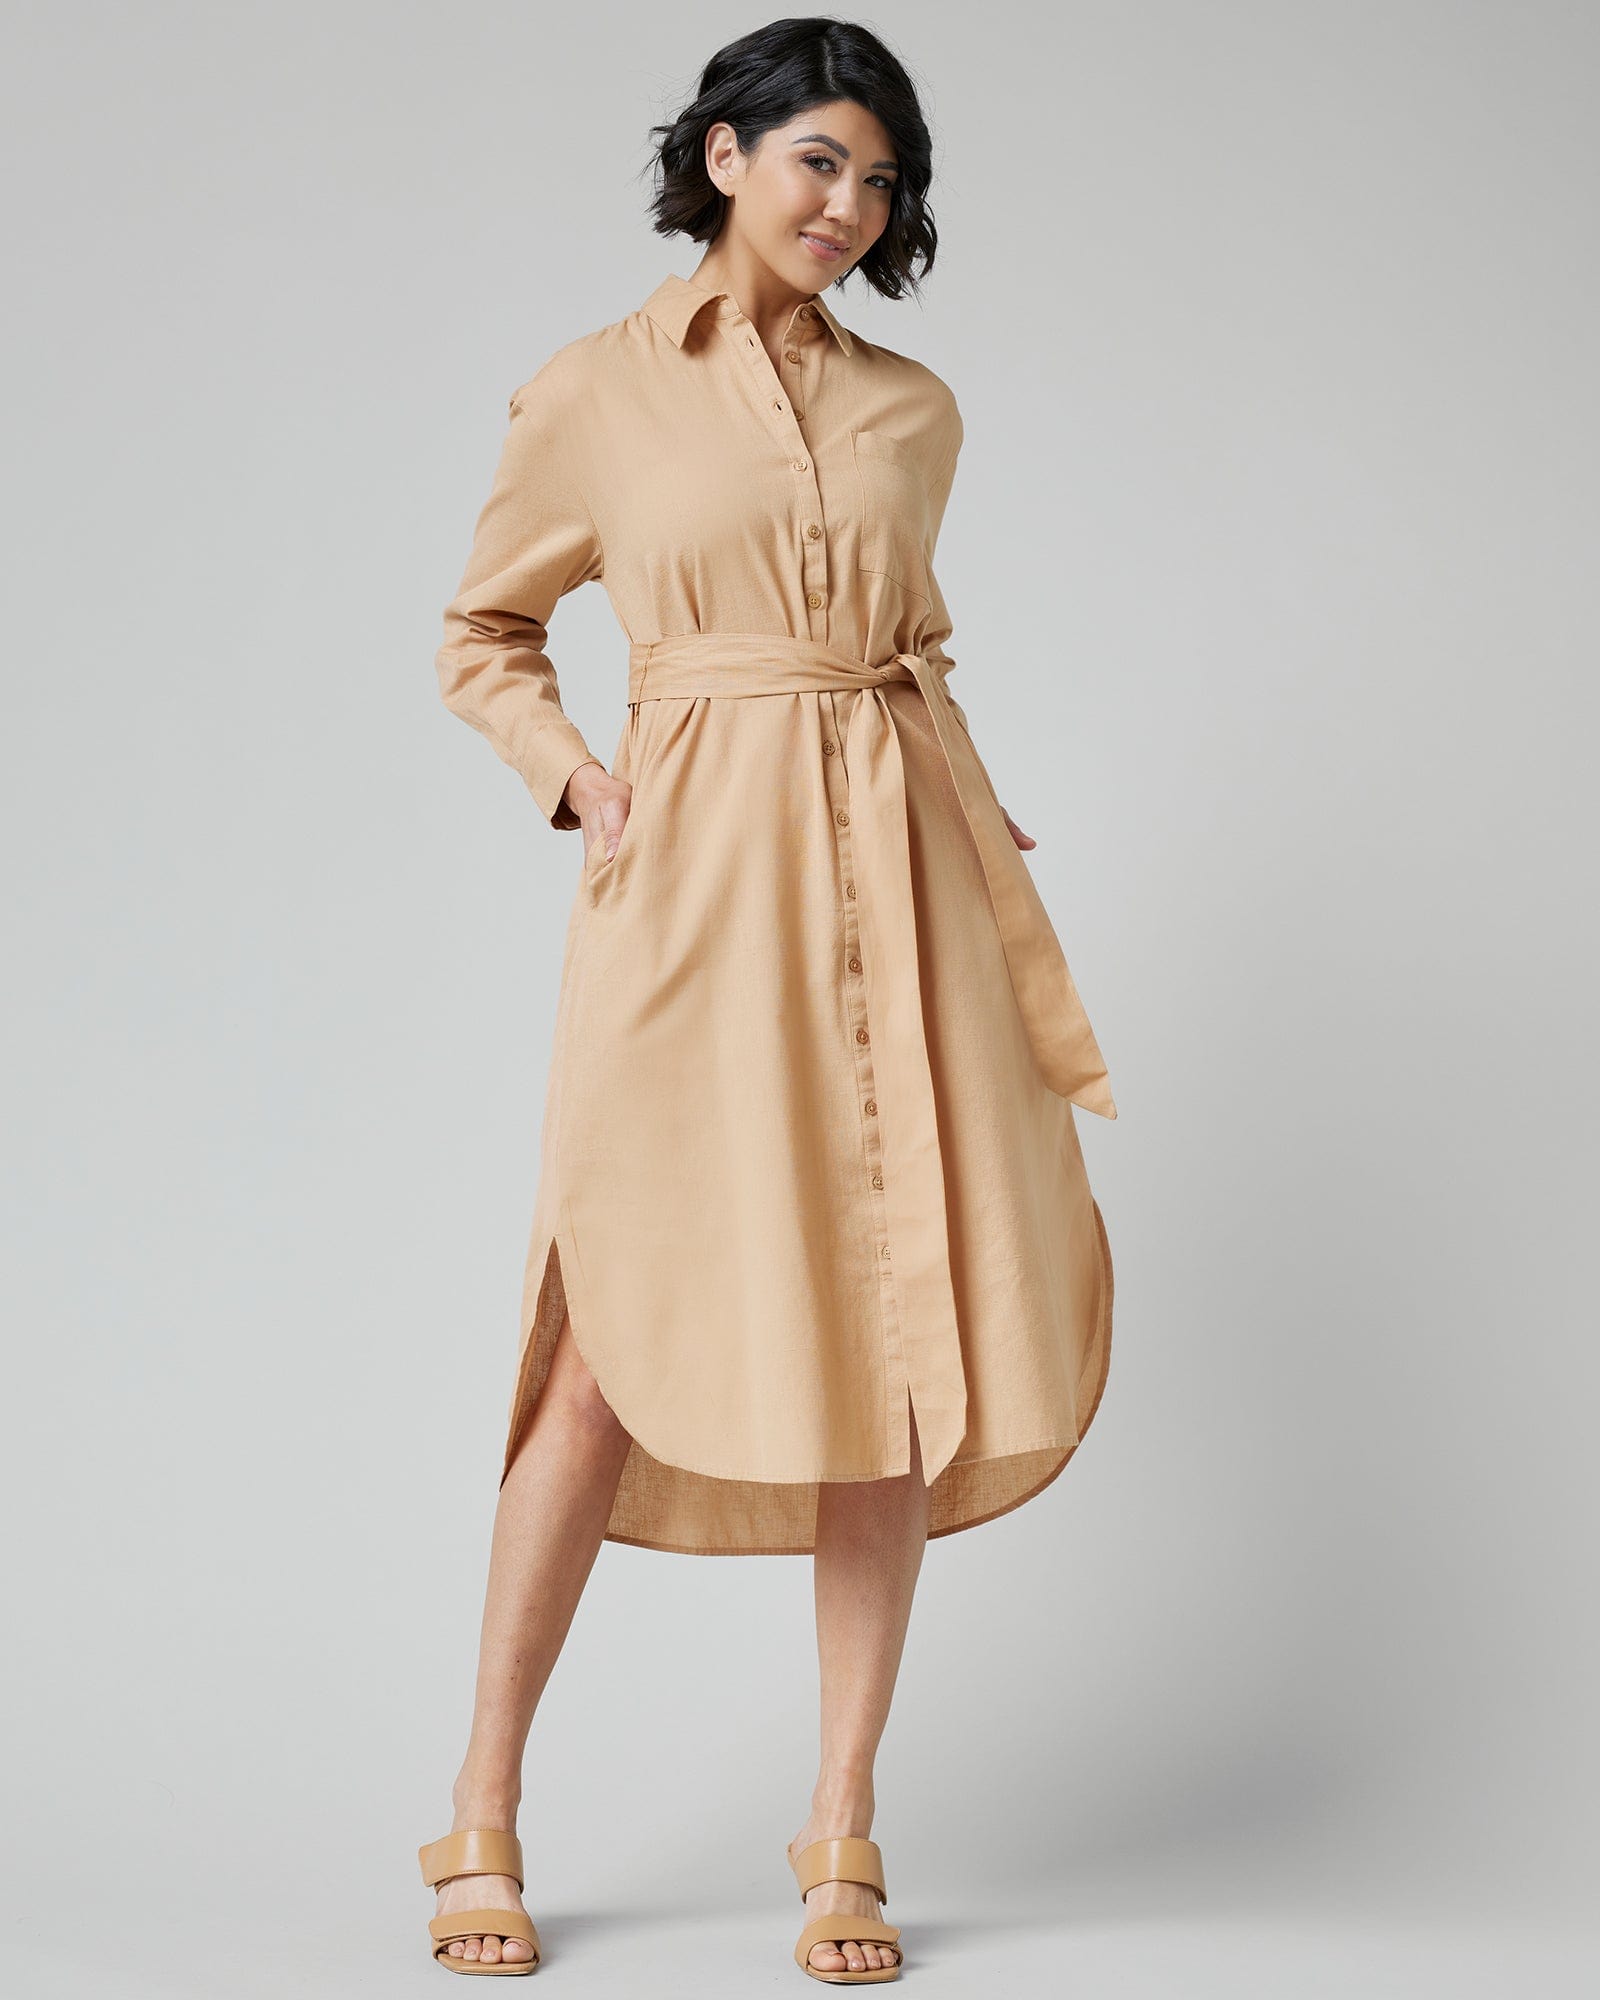 Woman in a long sleeve, knee-length, collared, button-down dress